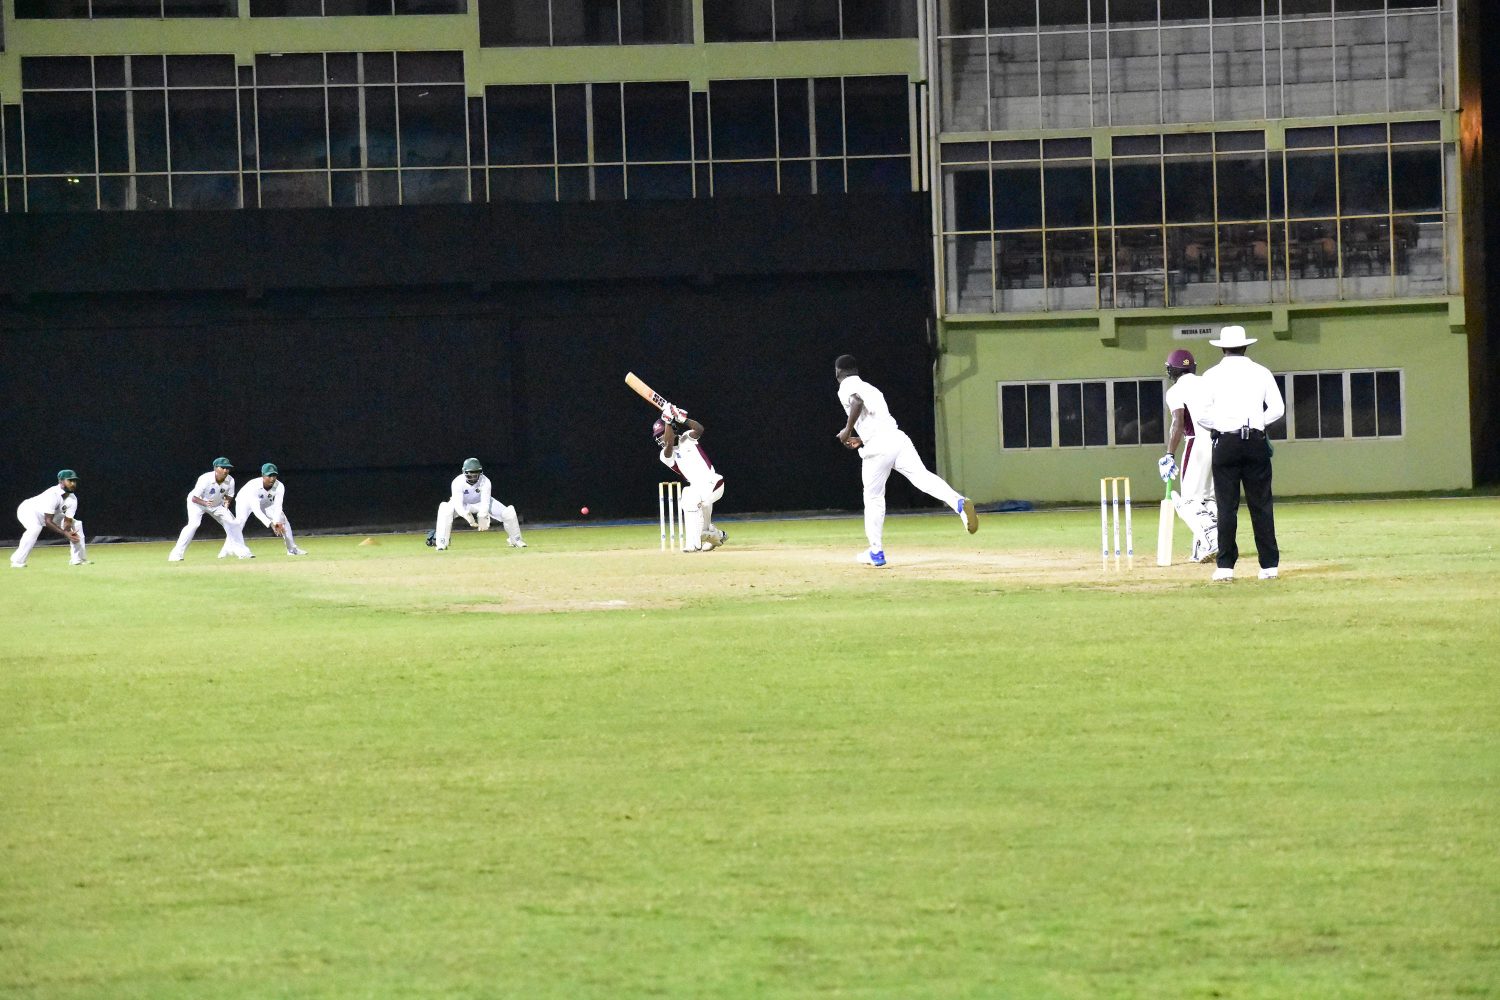 Night cricket at the stadium. Jaguar Sherfane Rutherford  bowls to Hurricanes’ Akeem Saunders whilst wicketkeeper Bramble and the Guyana slip cordon pay keen attention